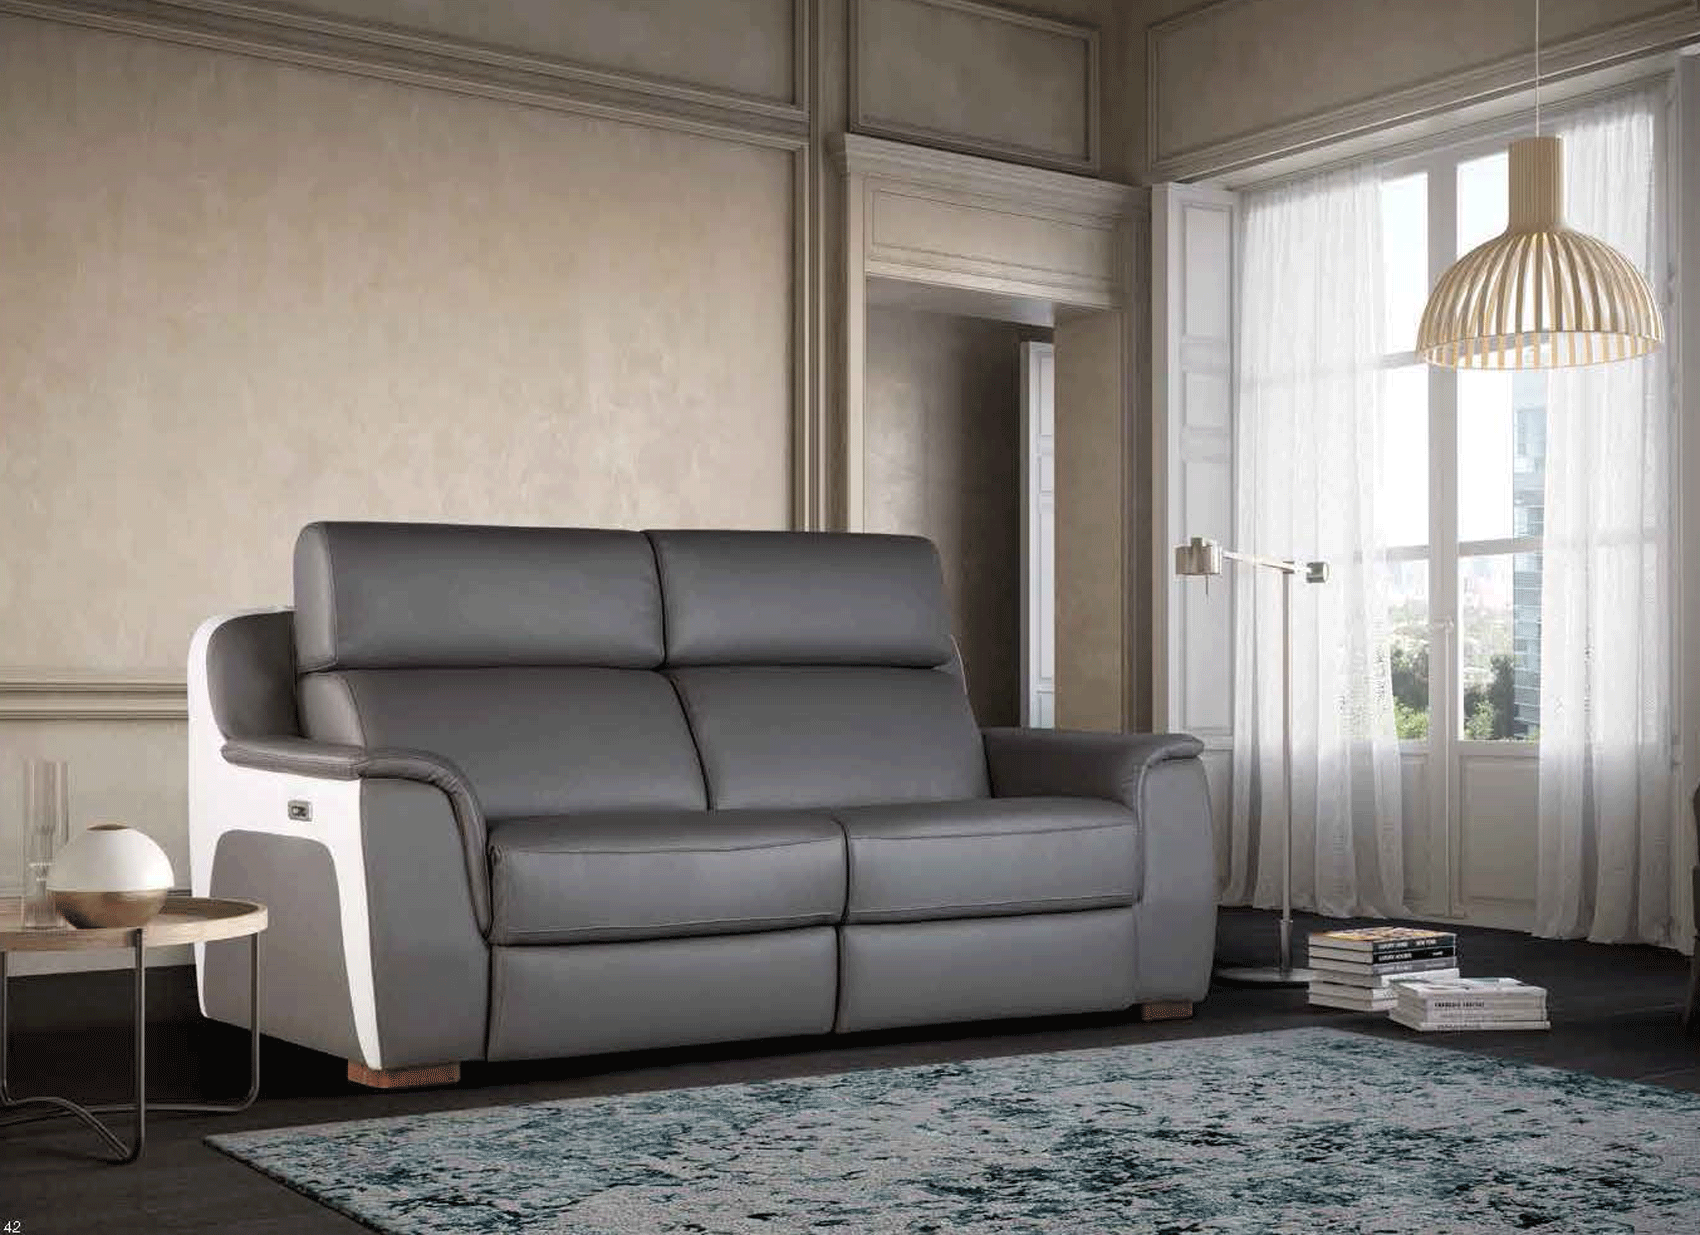 Living Room Furniture Sleepers Sofas Loveseats and Chairs Euro Living